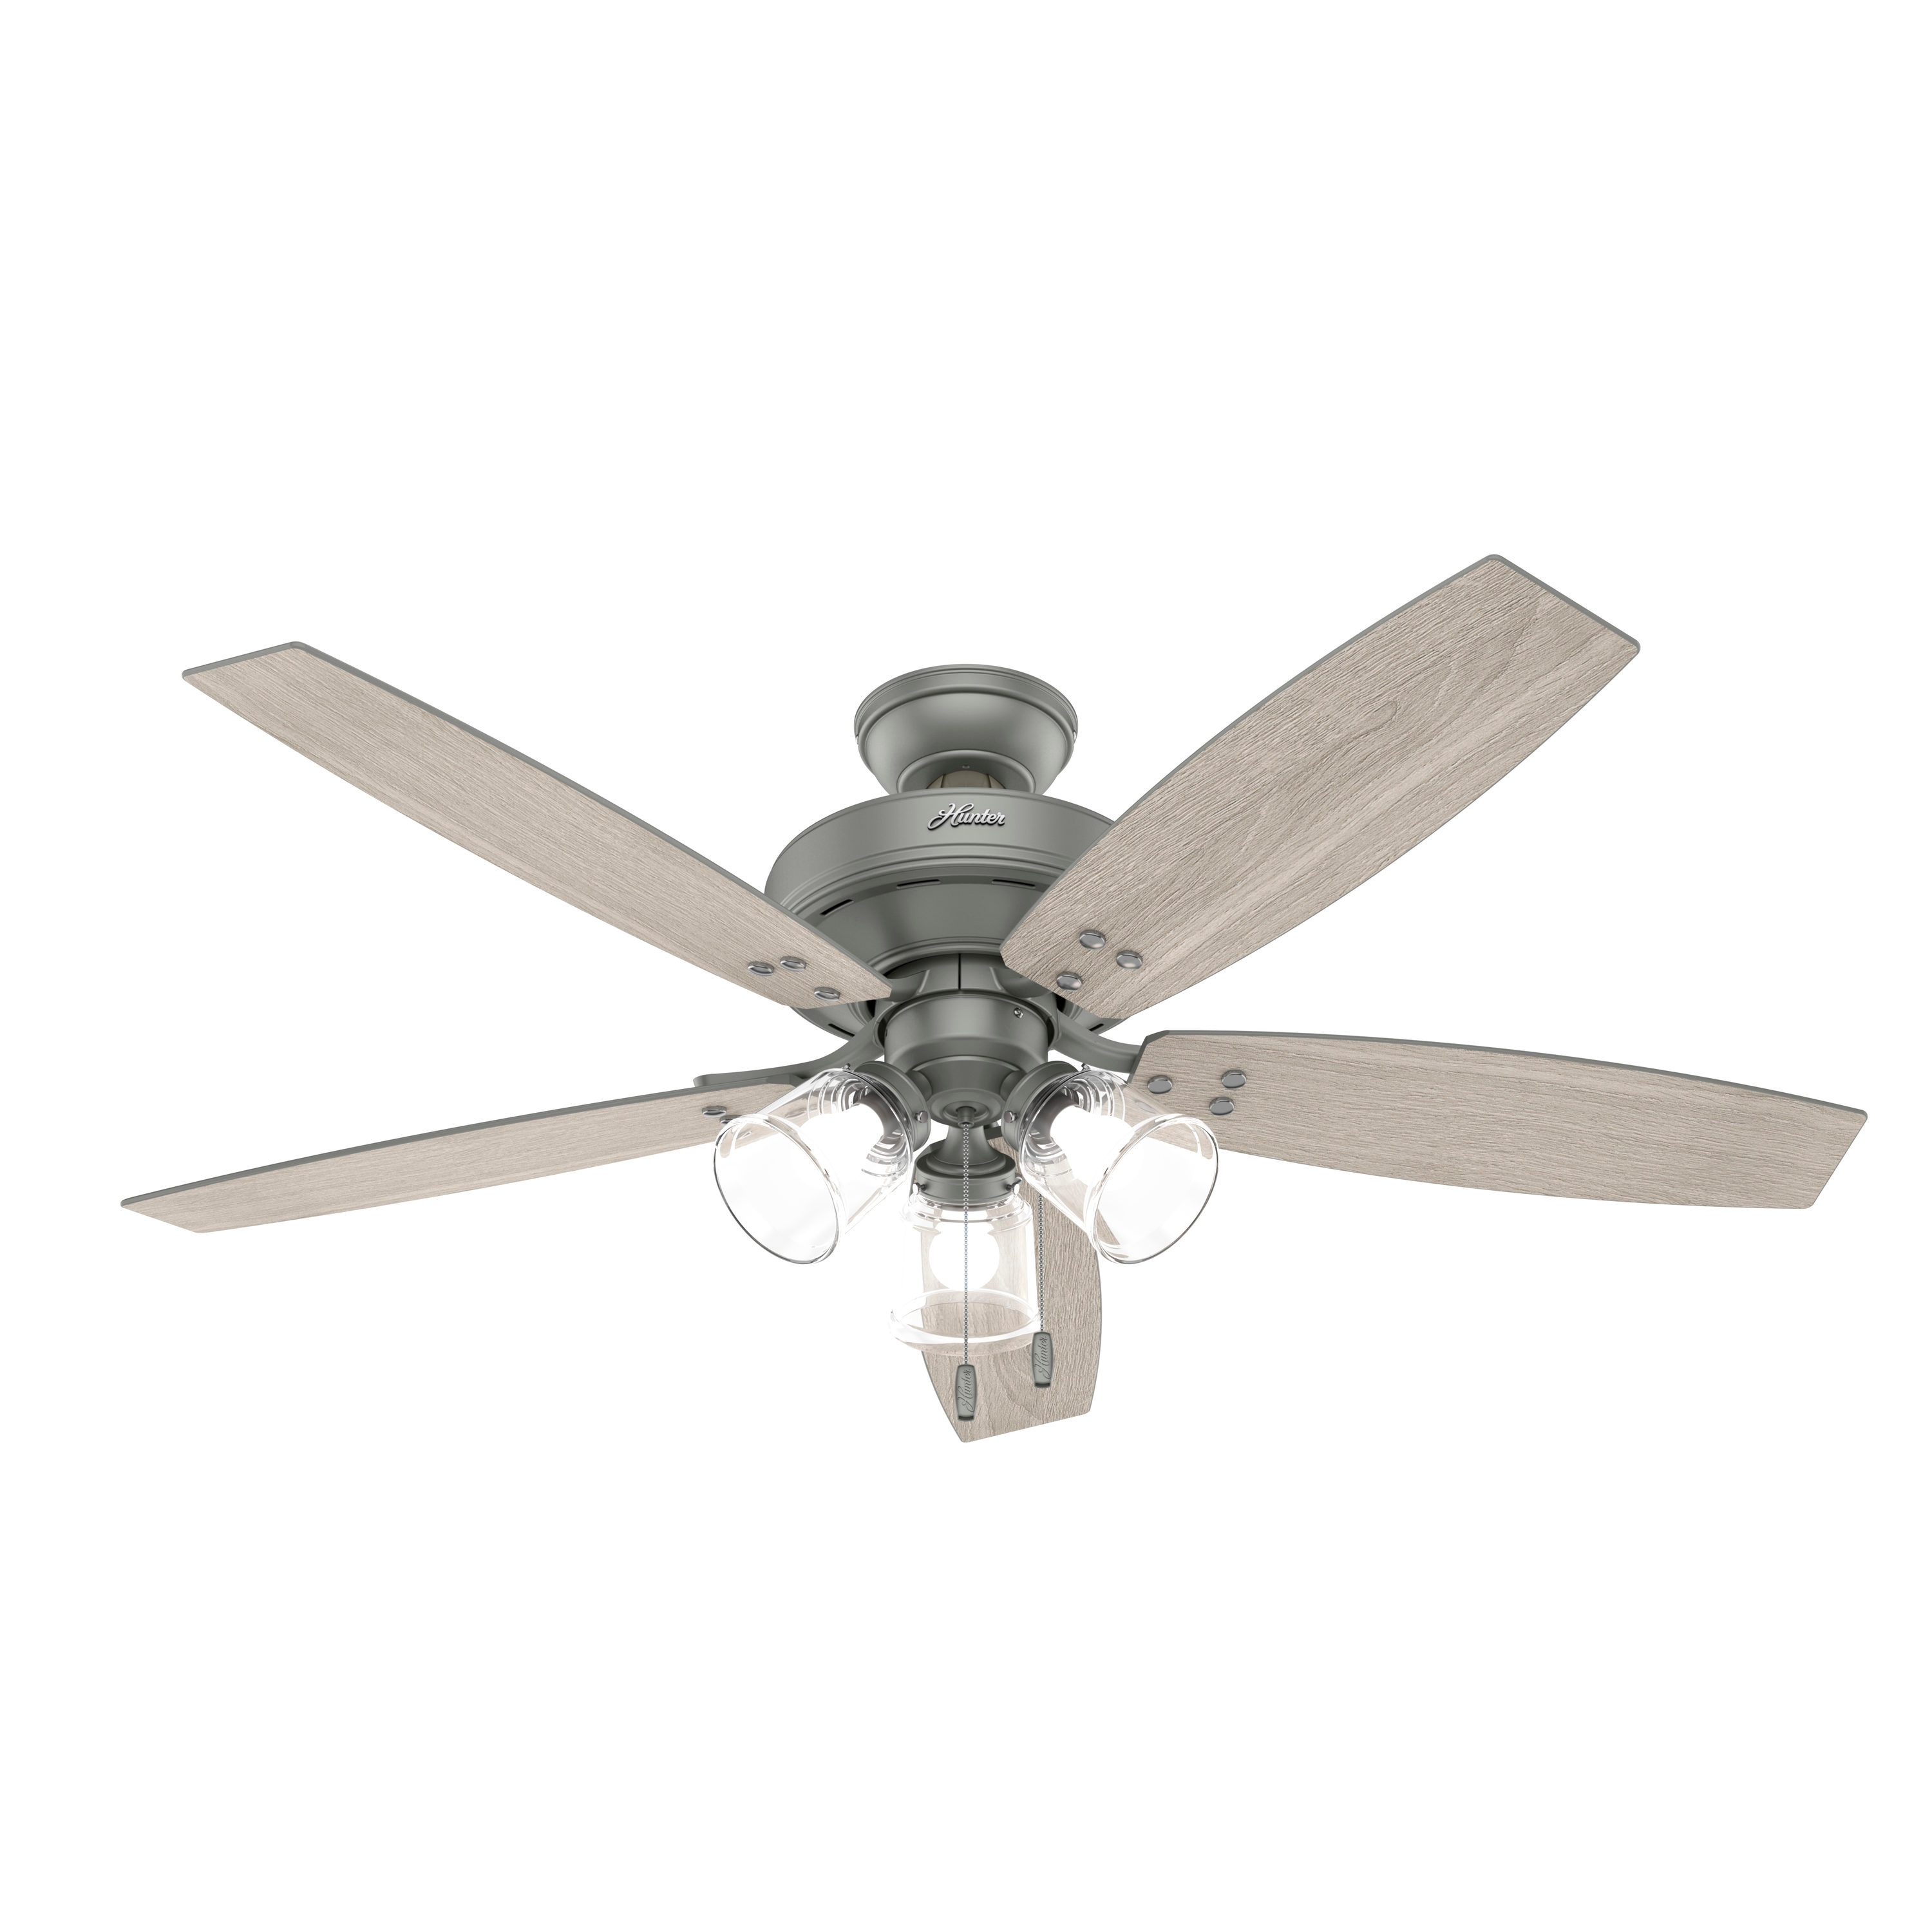 Hunter Hildebrand 52 In Matte Silver Indoor Ceiling Fan With Light 5 Blade The Fans Department At Lowes Com